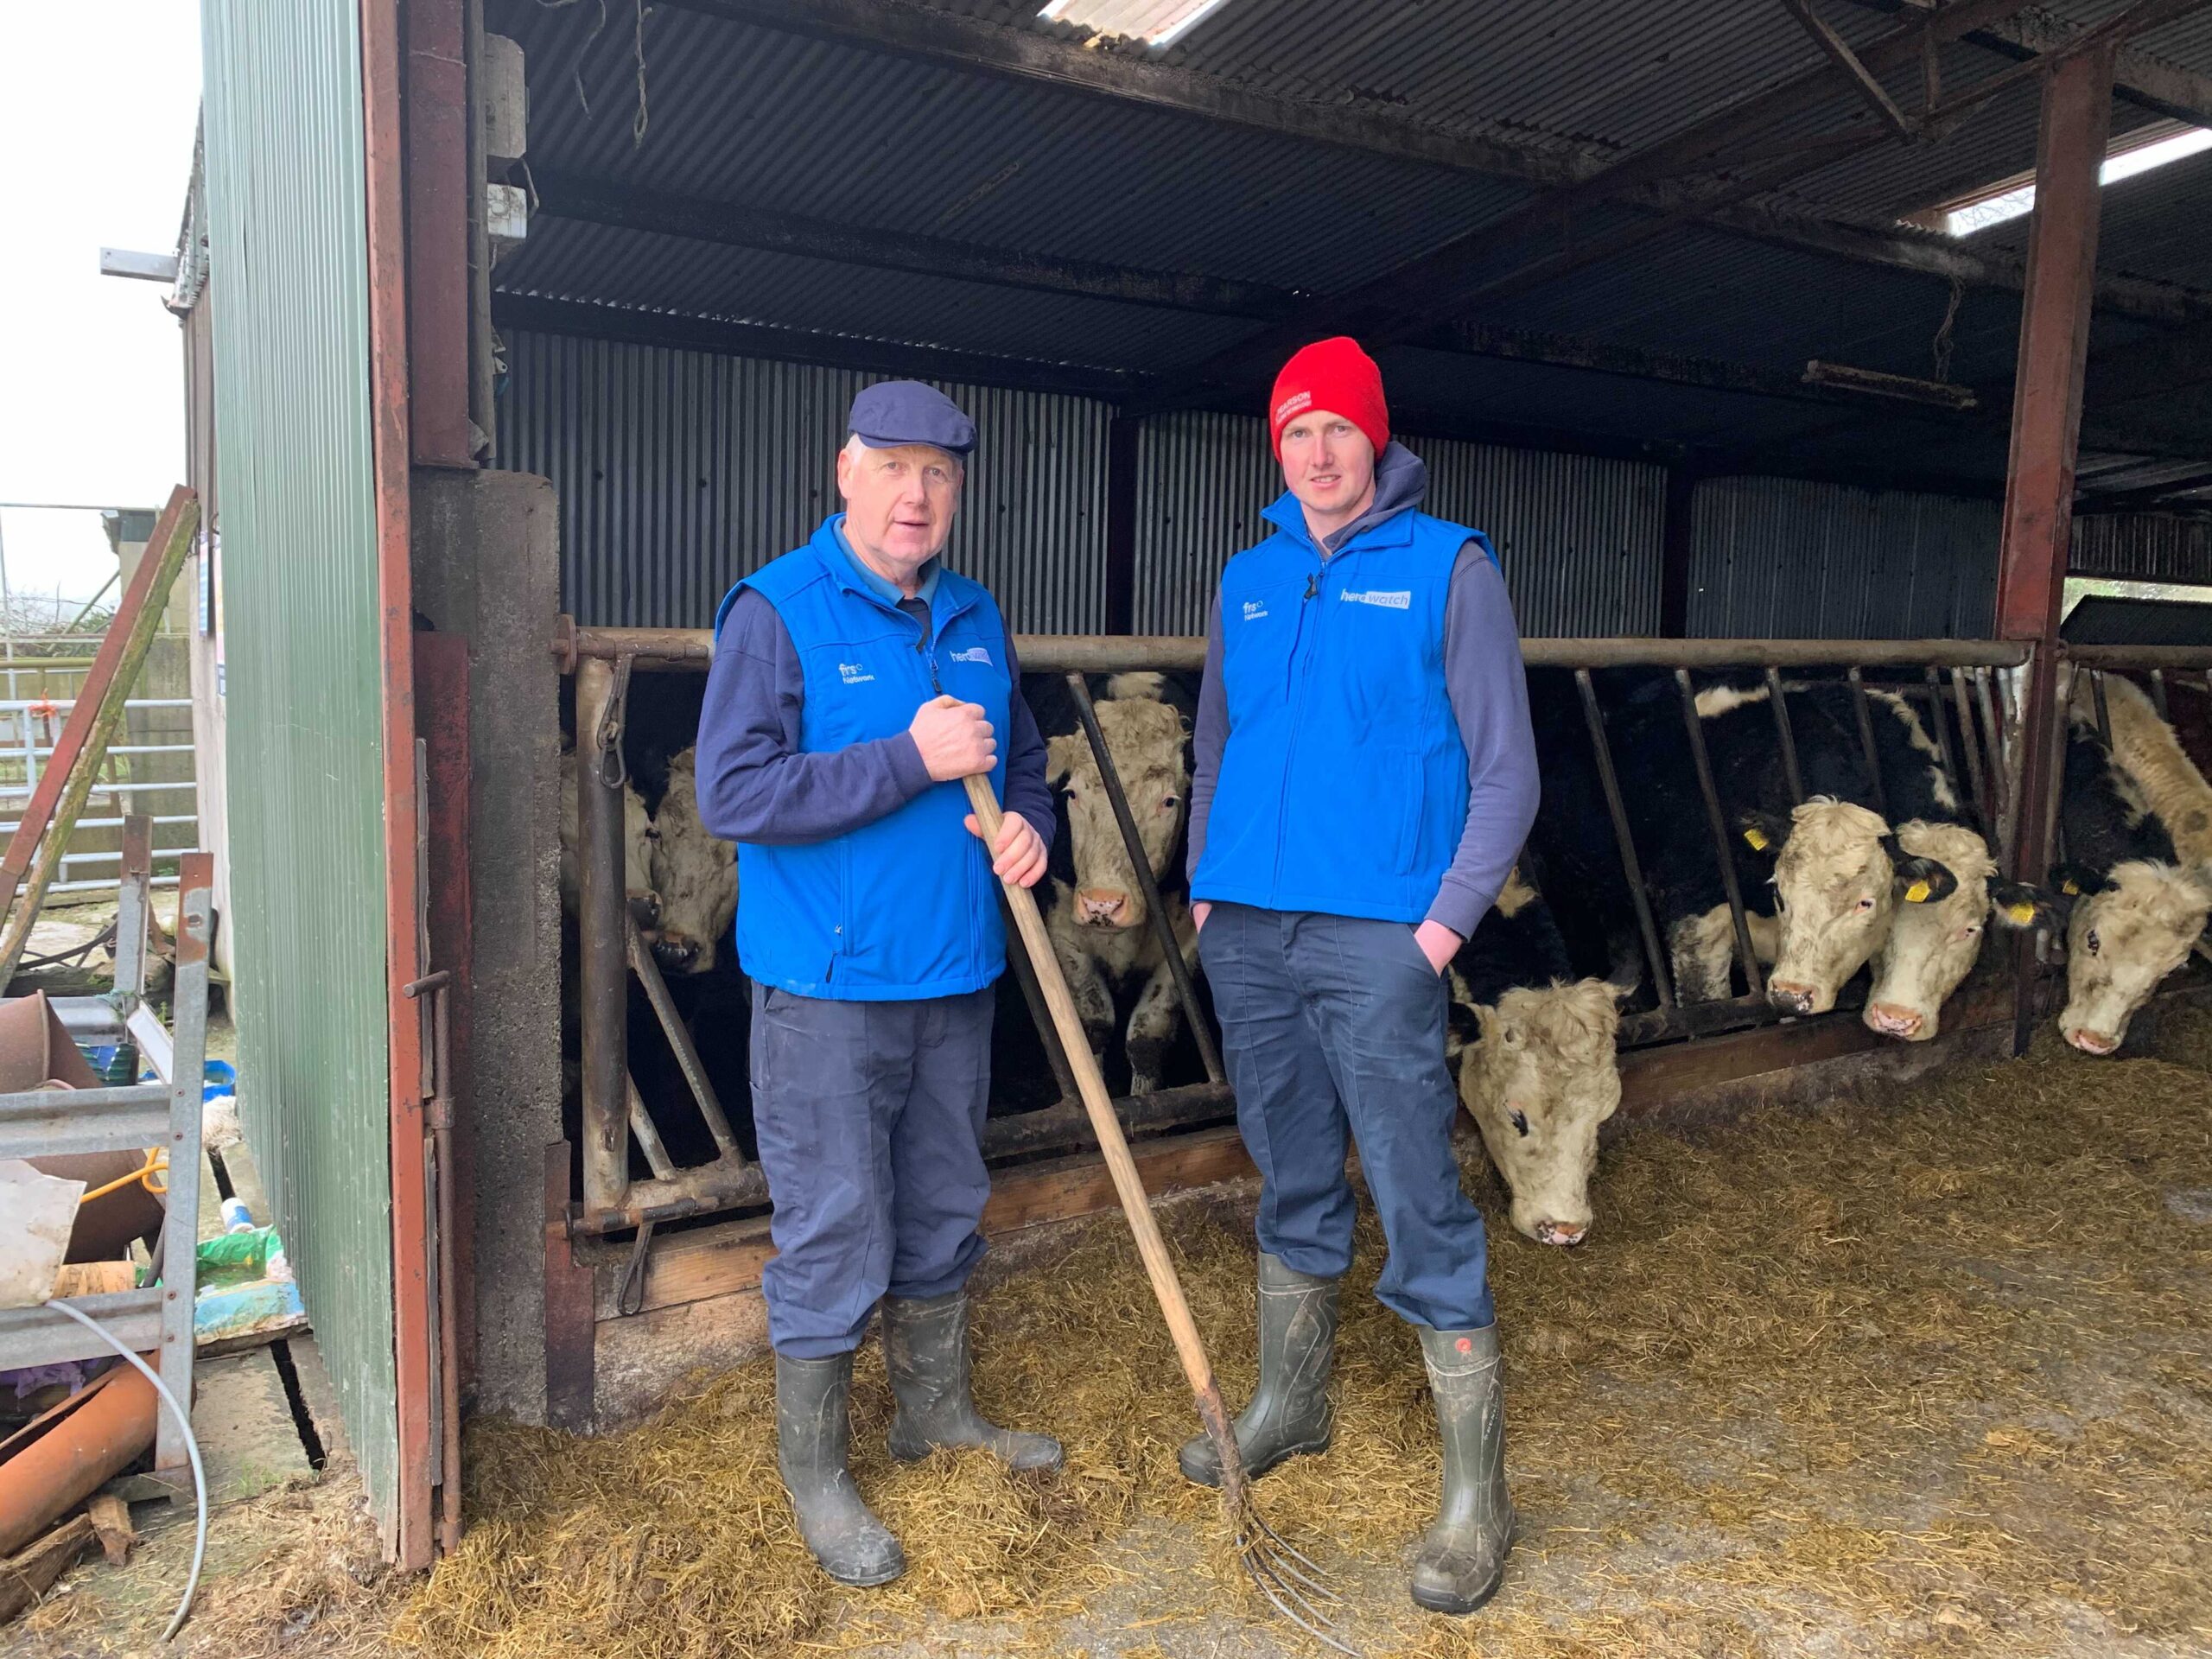 Herdwatch farmers in shed with cattle